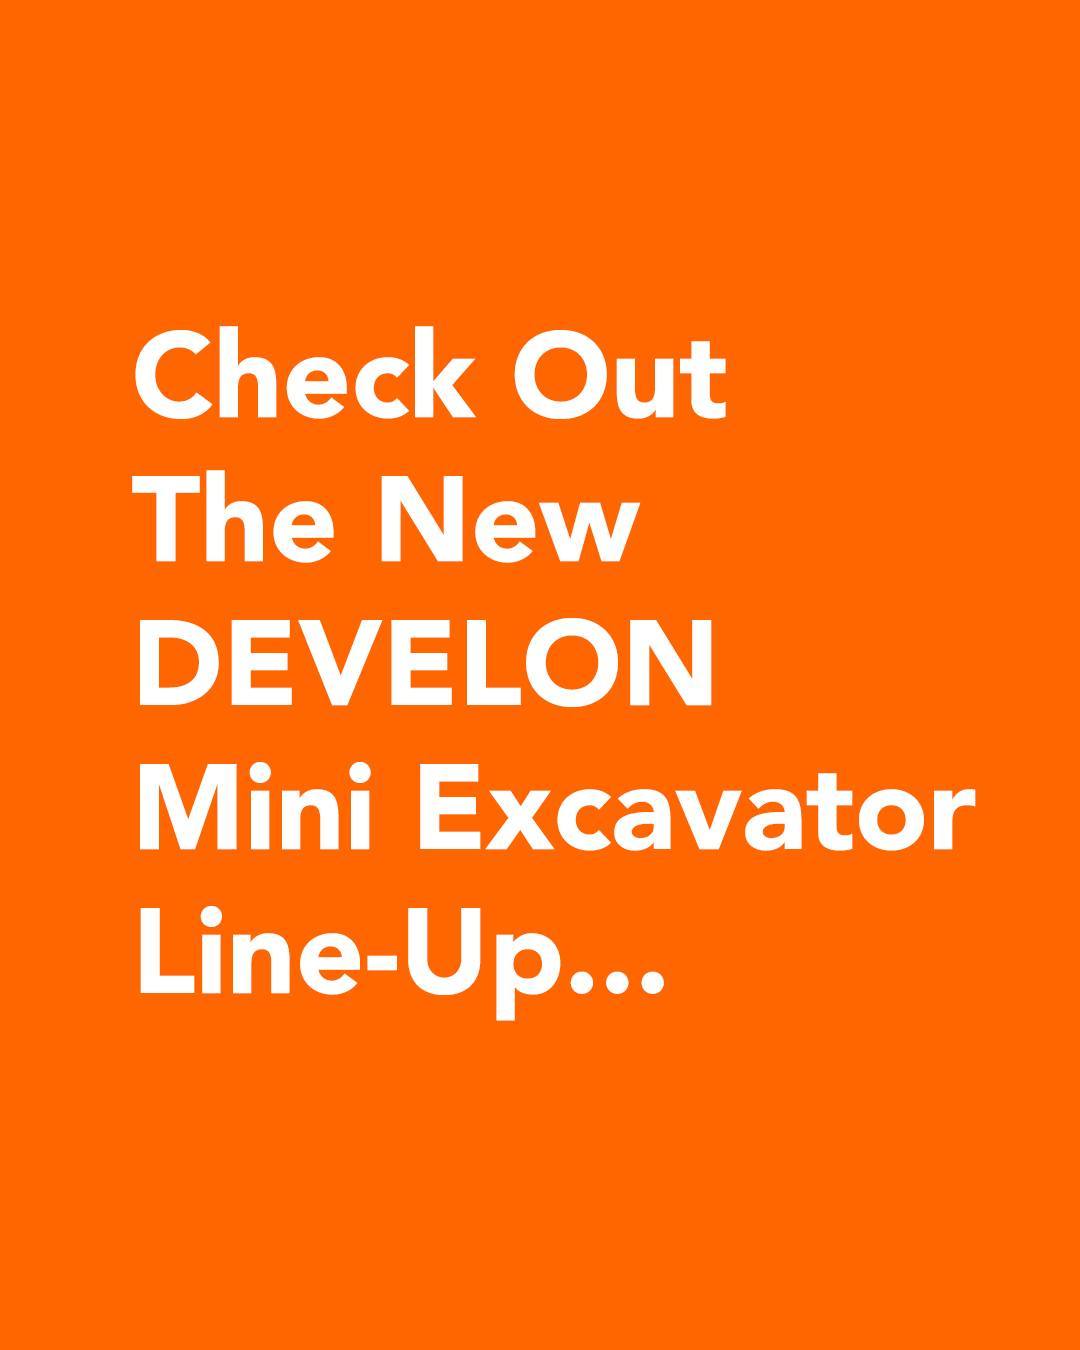 Exciting News! Our DEVELON mini excavator family just got bigger and better! 🌟 Say hello to our expanded lineup, where every model is packed with premium features at no extra cost! Get ready for thumb-ready arms, quick-coupler-ready designs, top-notch air conditioning systems, and advanced telematics all as standard! 🔥 Ready to find out more? Call or visit our website for further details! 📞 #DEVELON #Excavators #CompactConstruction #MiniExcavator #CompactExcavator #DEVELONEquipment #ConstructionEquipment #Construction